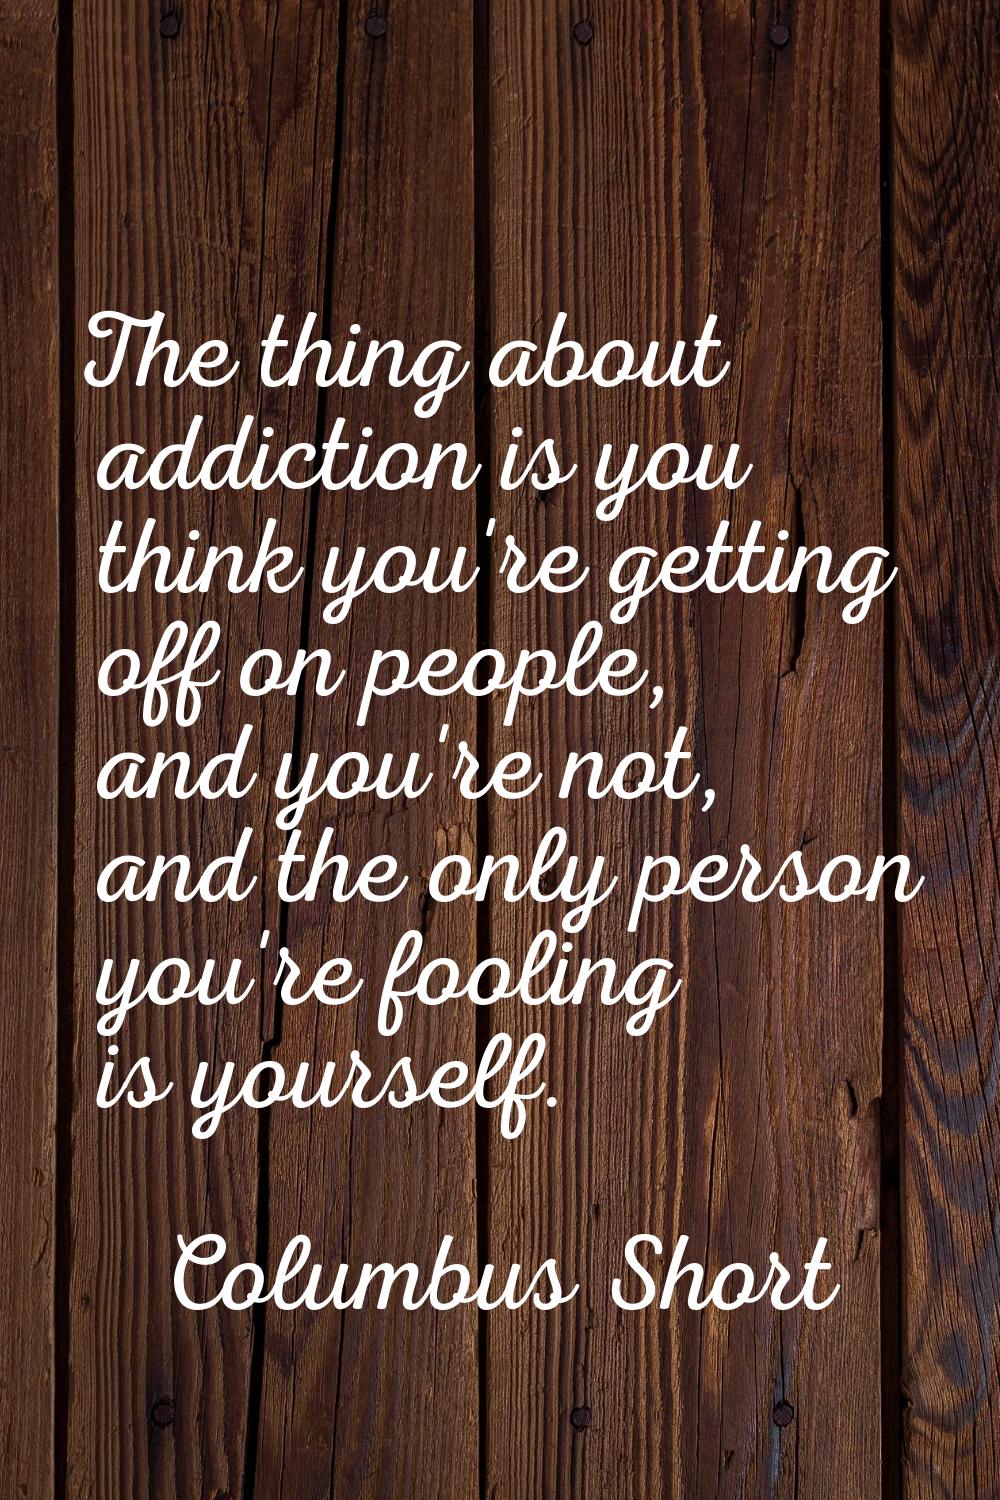 The thing about addiction is you think you're getting off on people, and you're not, and the only p